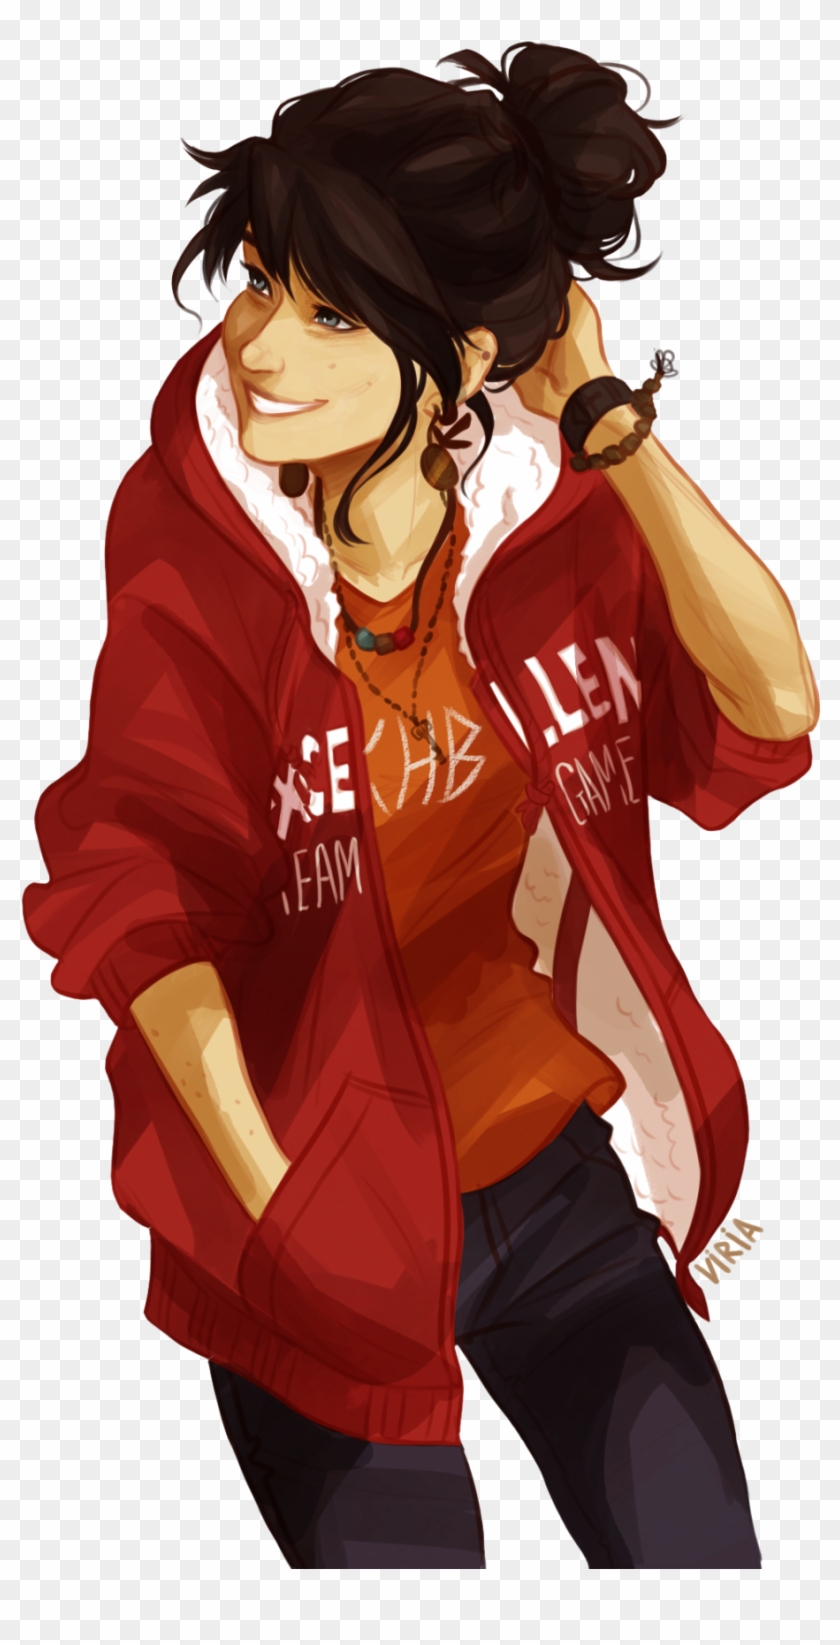 Duh We Had To - Clarisse Percy Jackson Fan Art Clipart #4979317